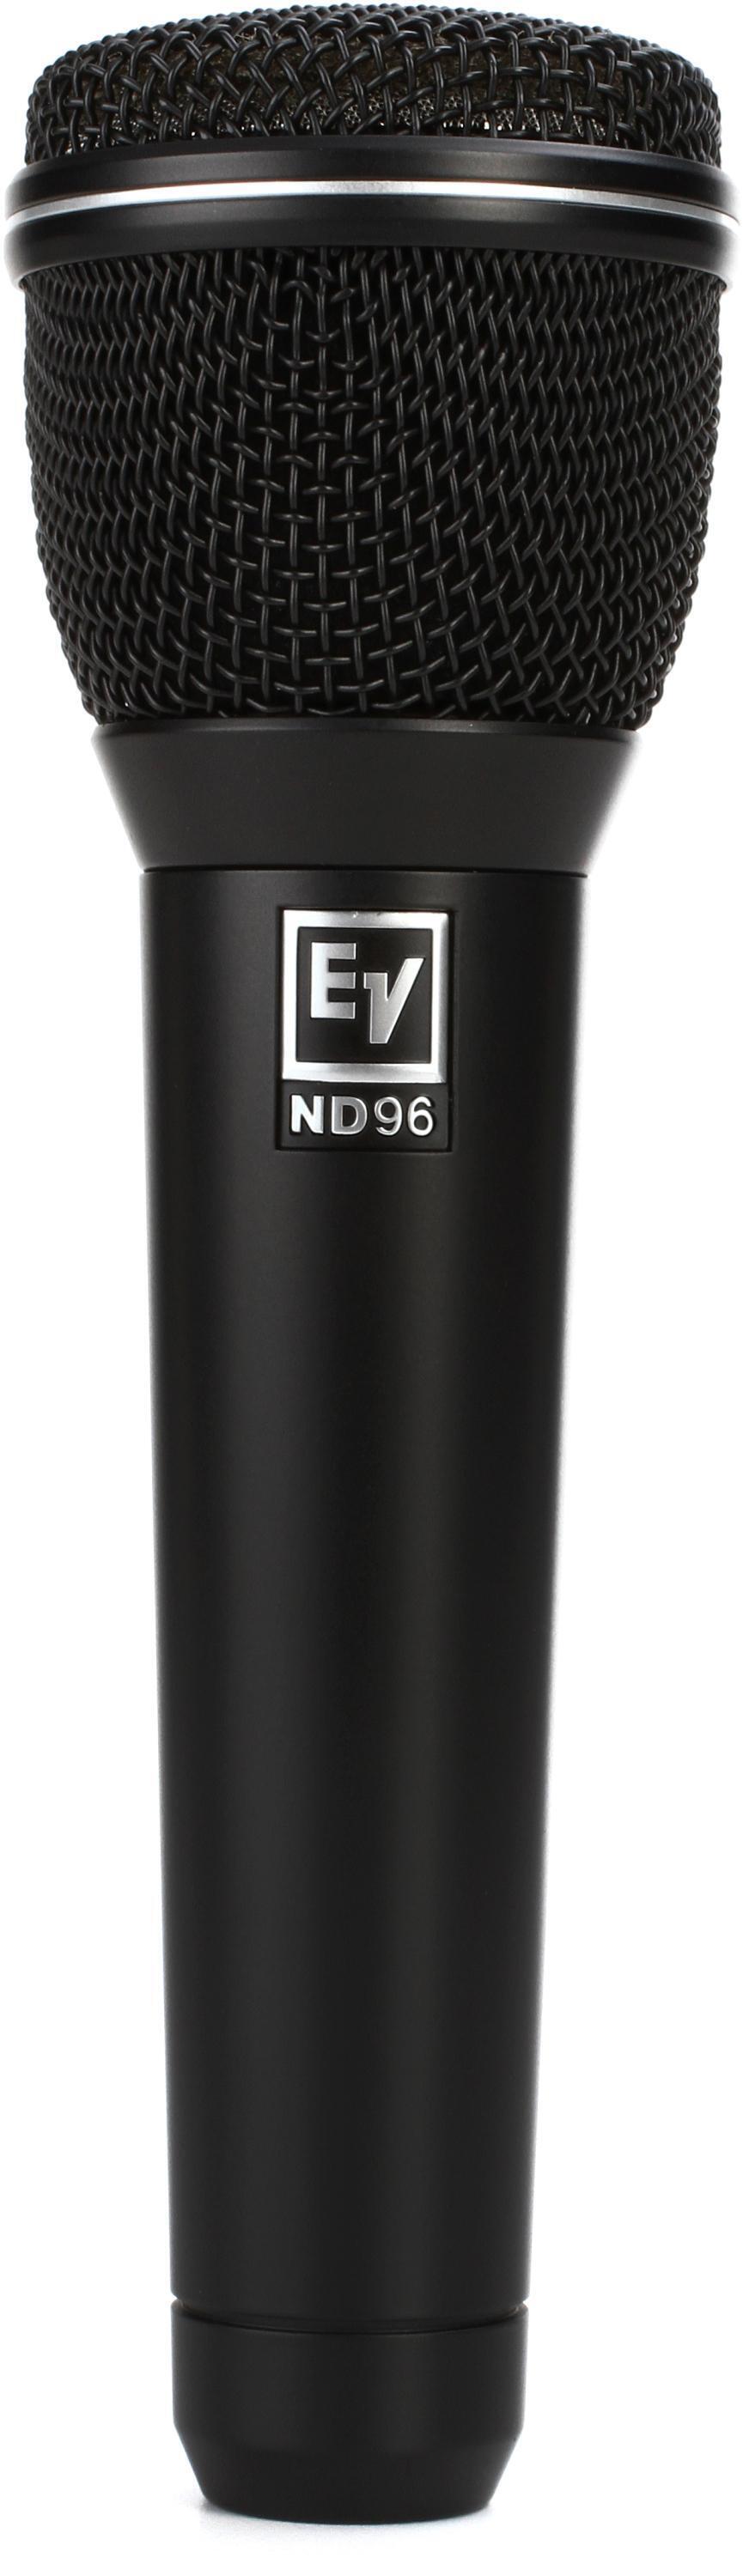 Bundled Item: Electro-Voice ND96 Supercardioid Dynamic Vocal Microphone